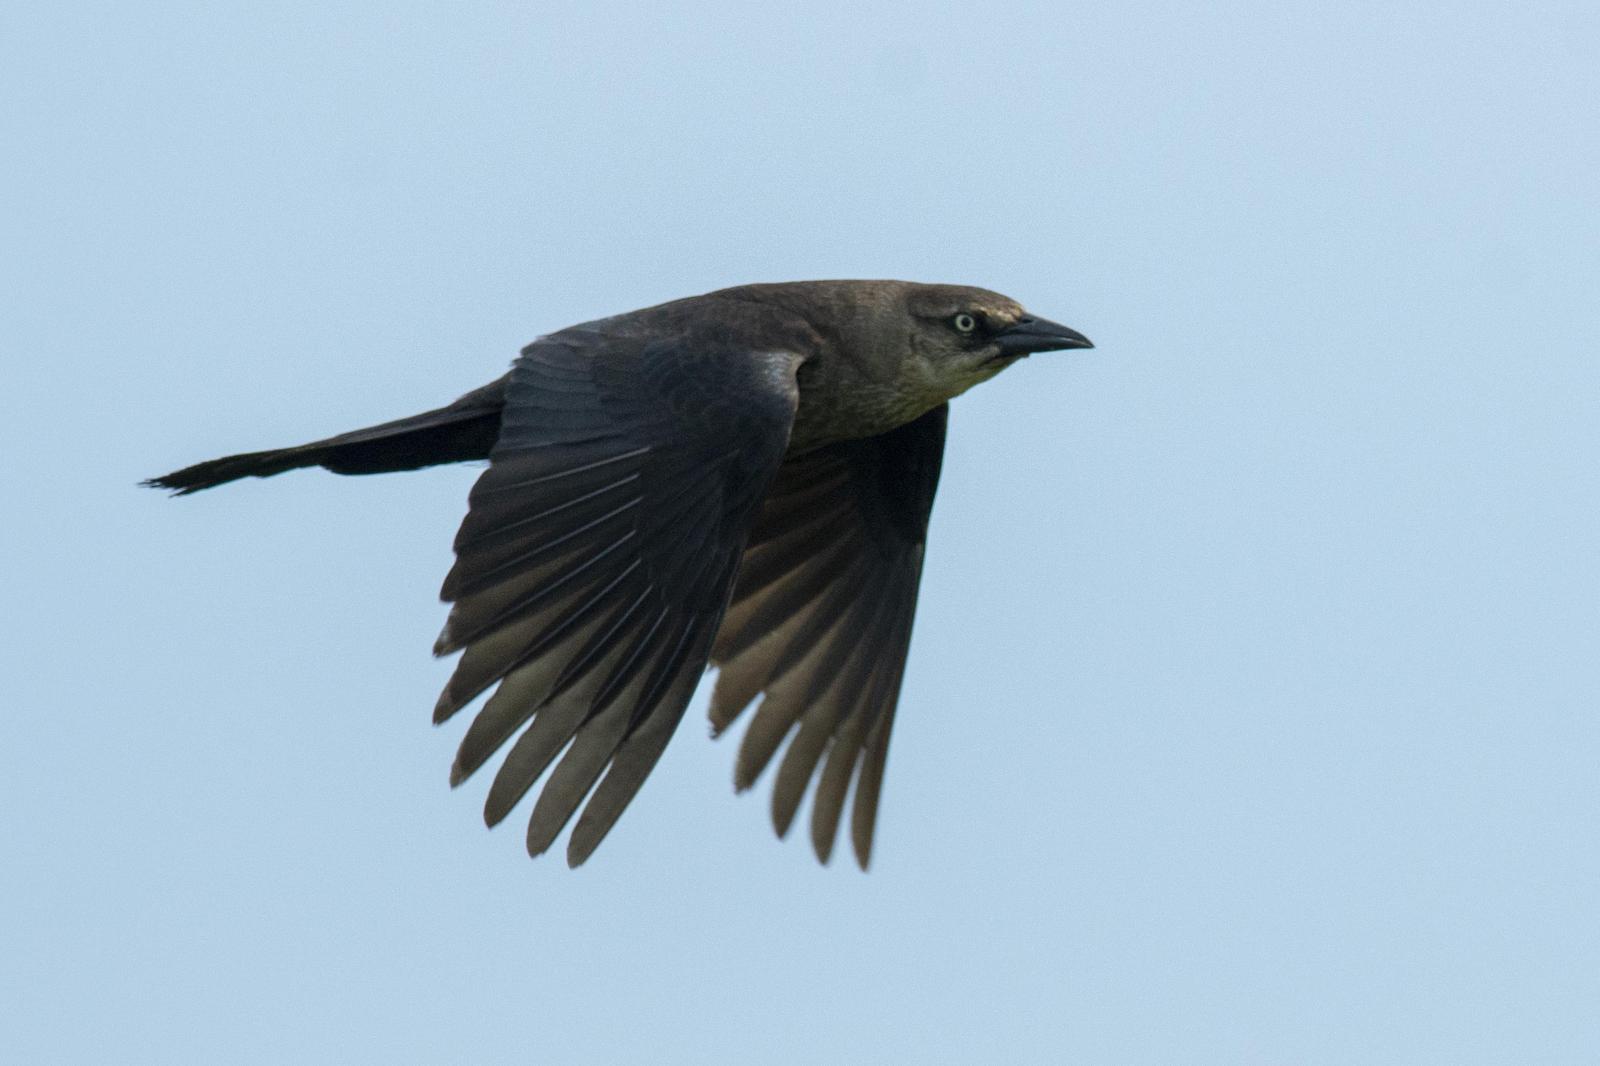 Boat-tailed Grackle Photo by Thomas J Dunkerton